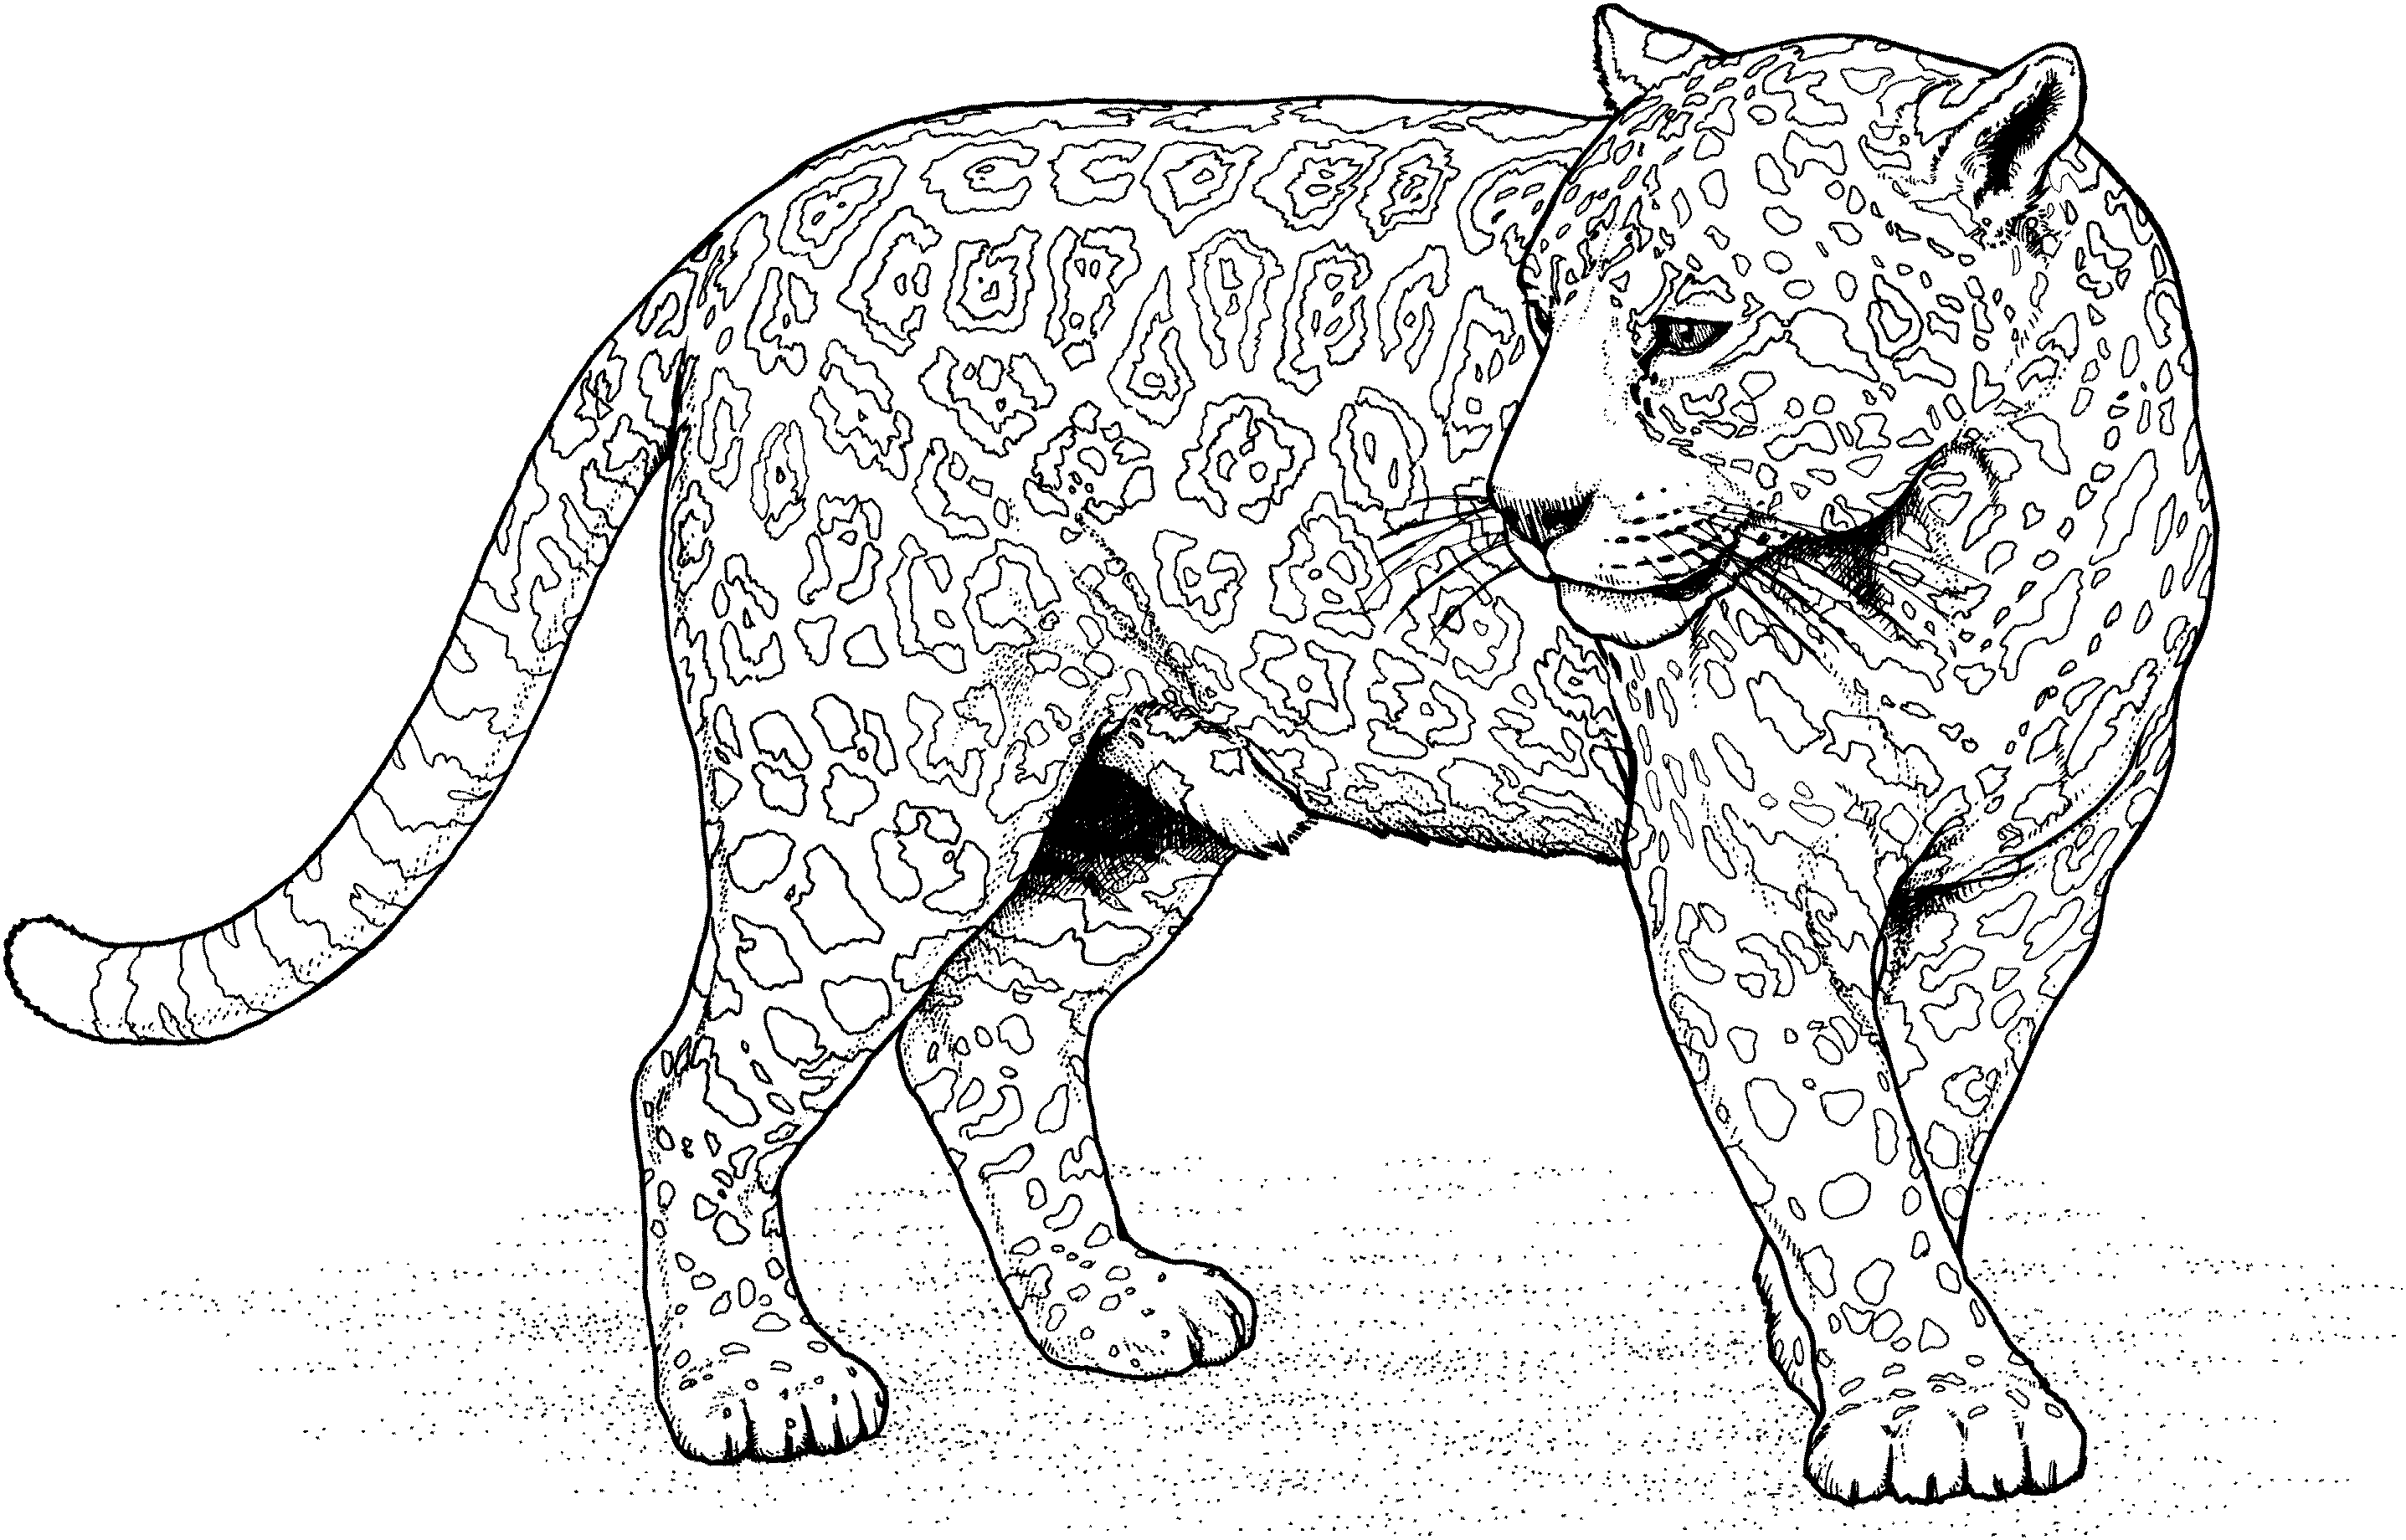 colouring pages big 5 animals 70 best the big five images on pinterest 5 big colouring animals pages 